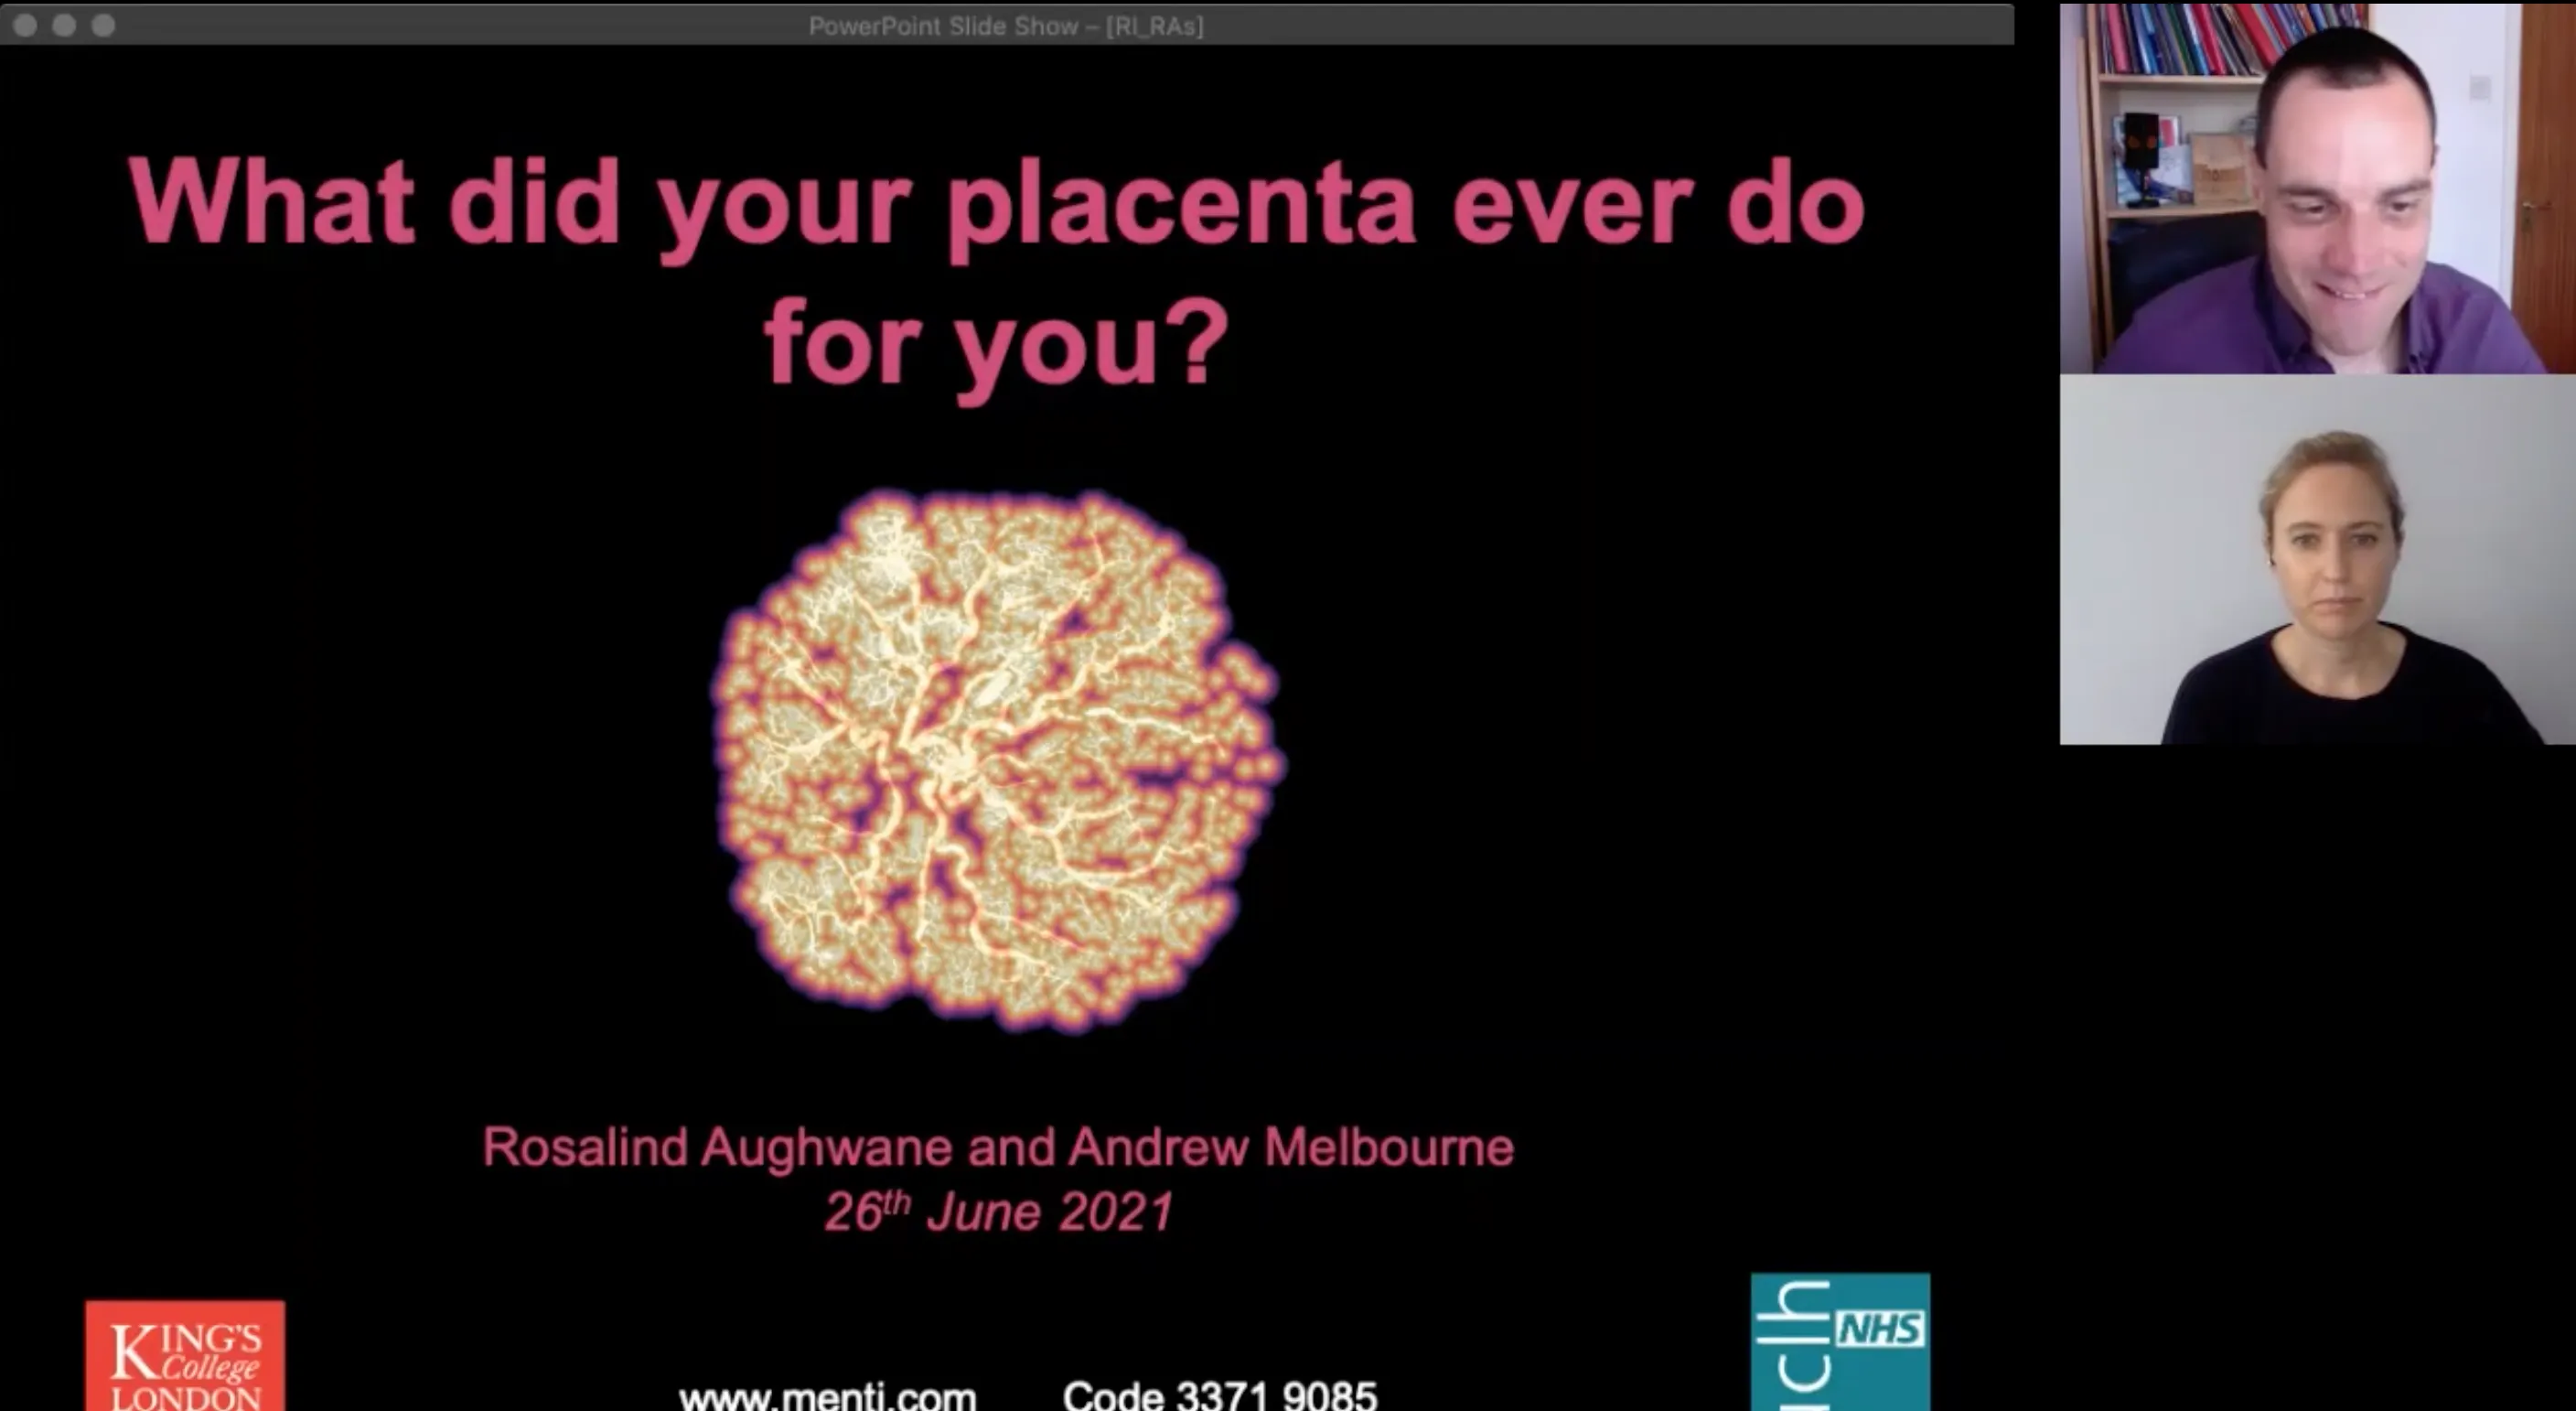 Dr Andrew Melbourne, Dr Rosalind Aughwane: What did your placenta ever do for you?